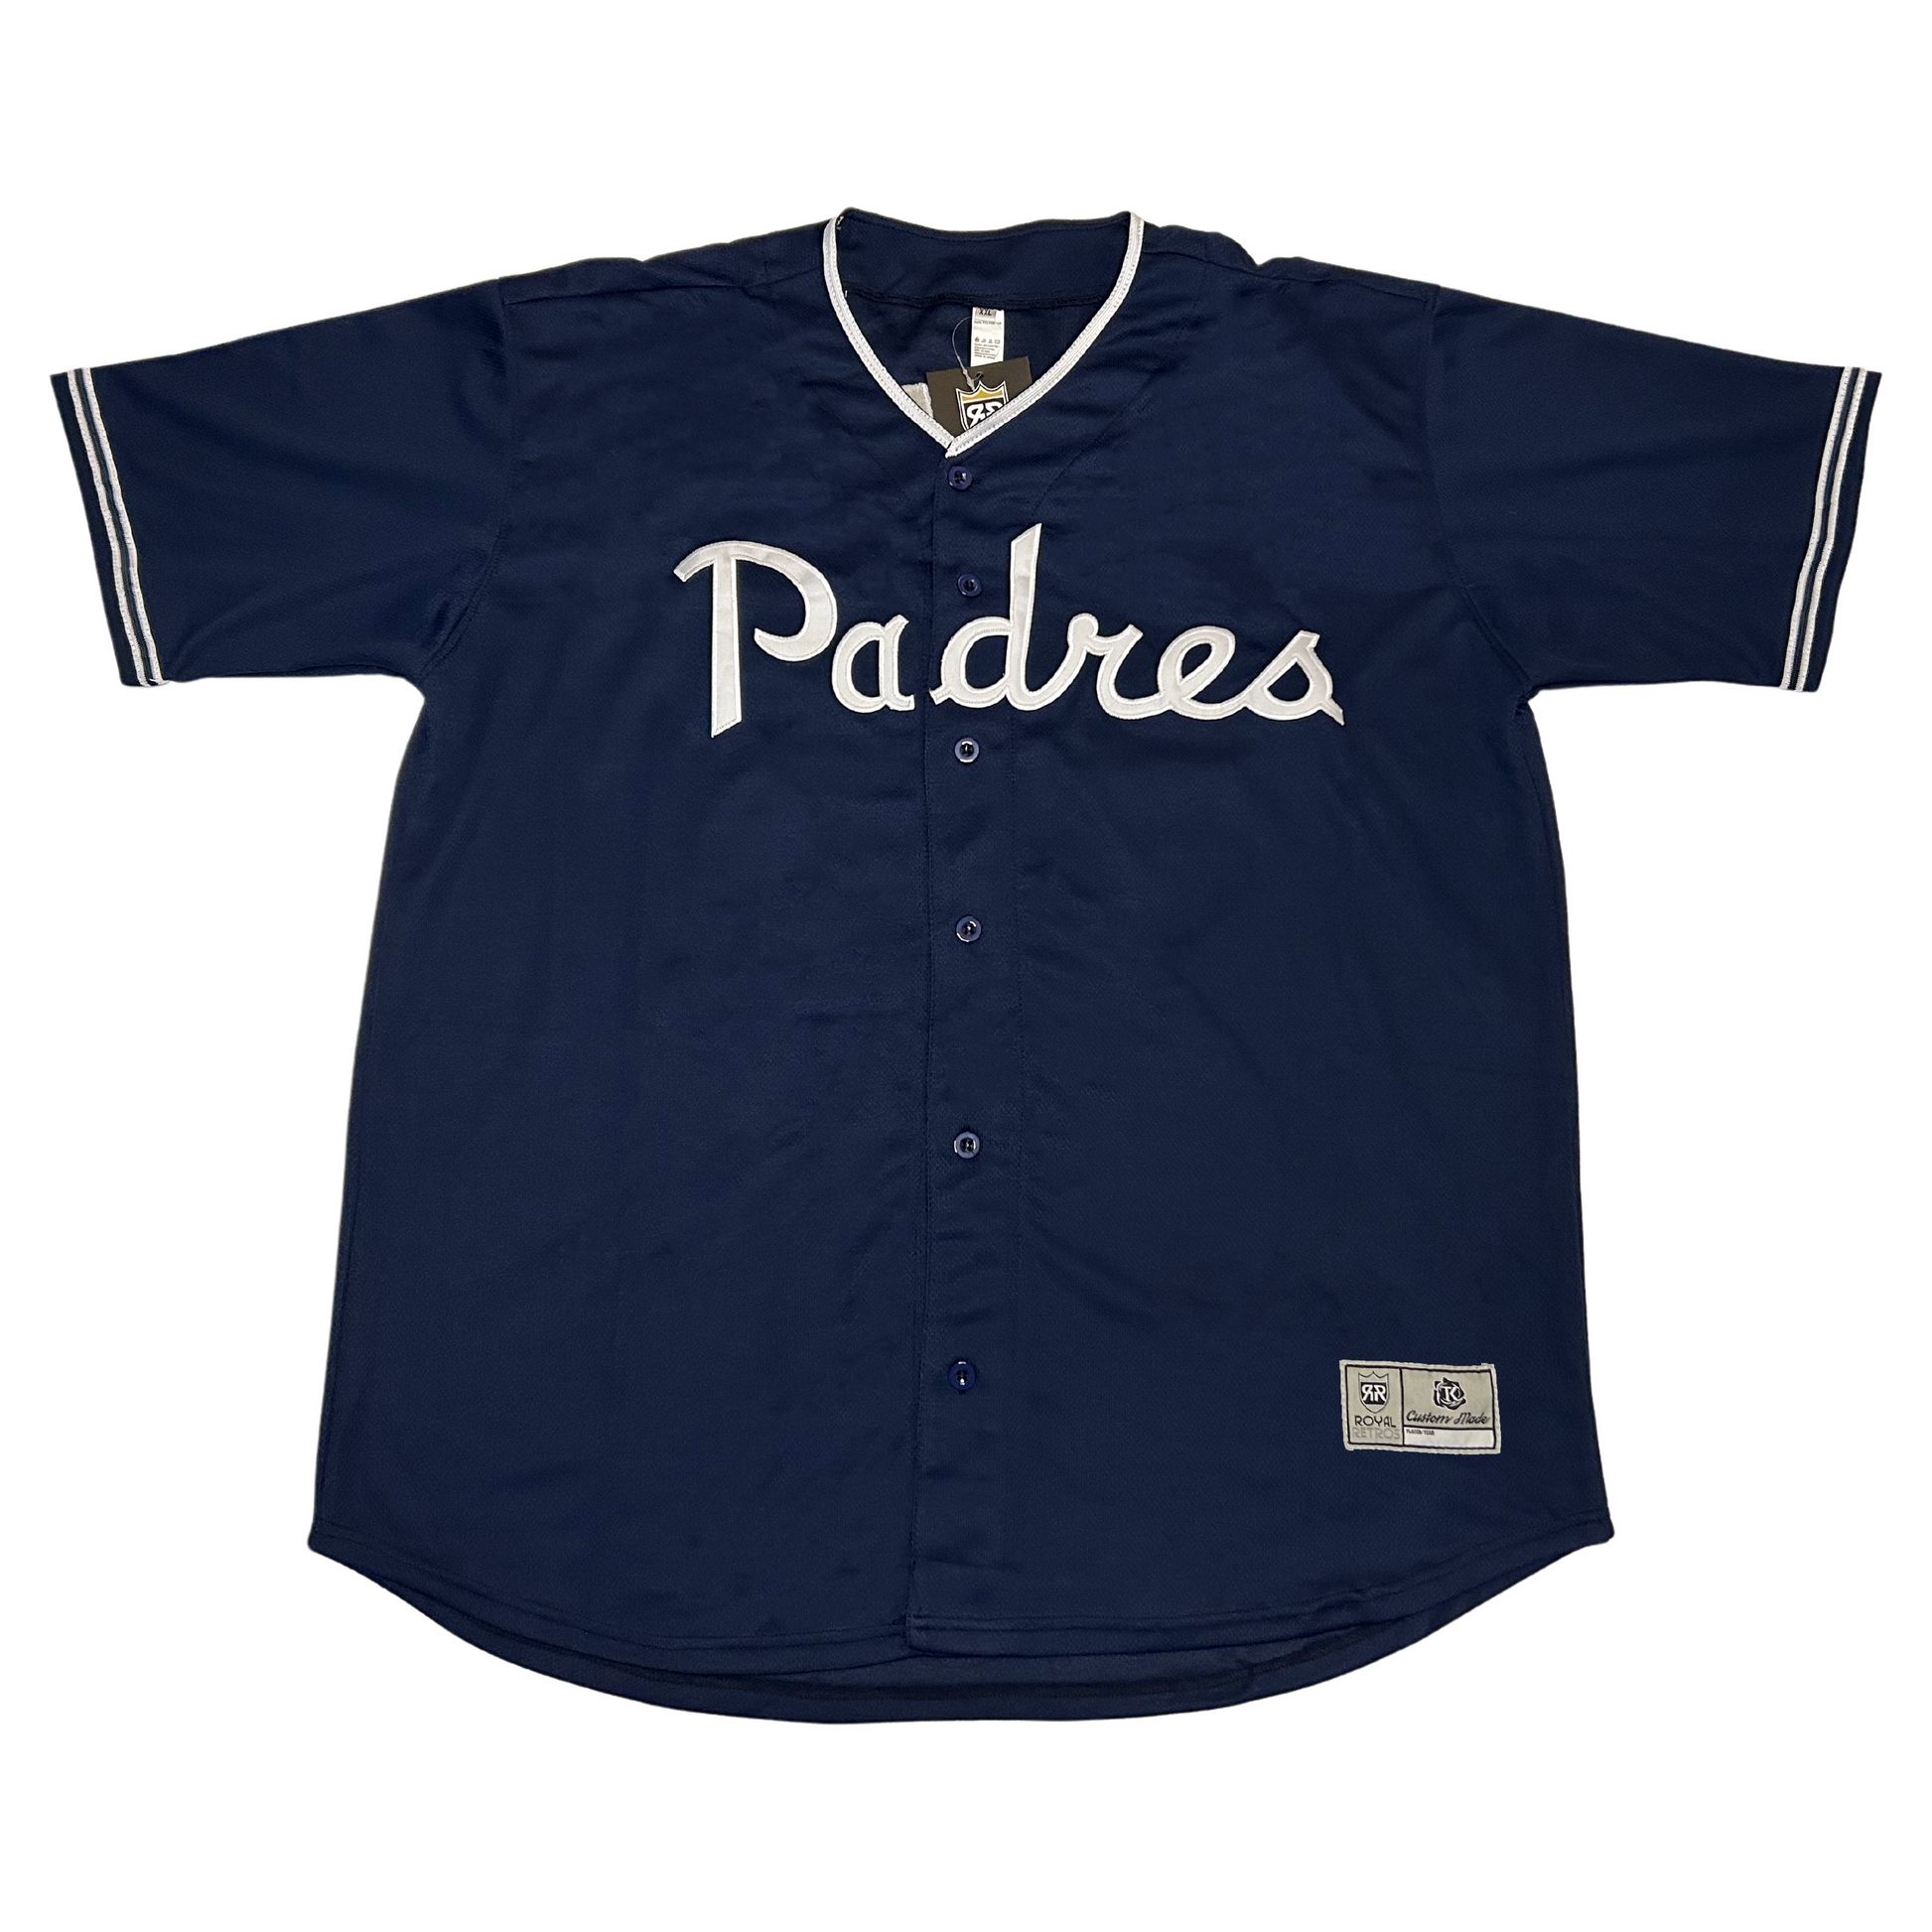 mlb recolored series: san diego padres #mlb #baseball #sandiegopadres  #mlbjersey #jerseydesign #conceptjerseys #mlbrecolored